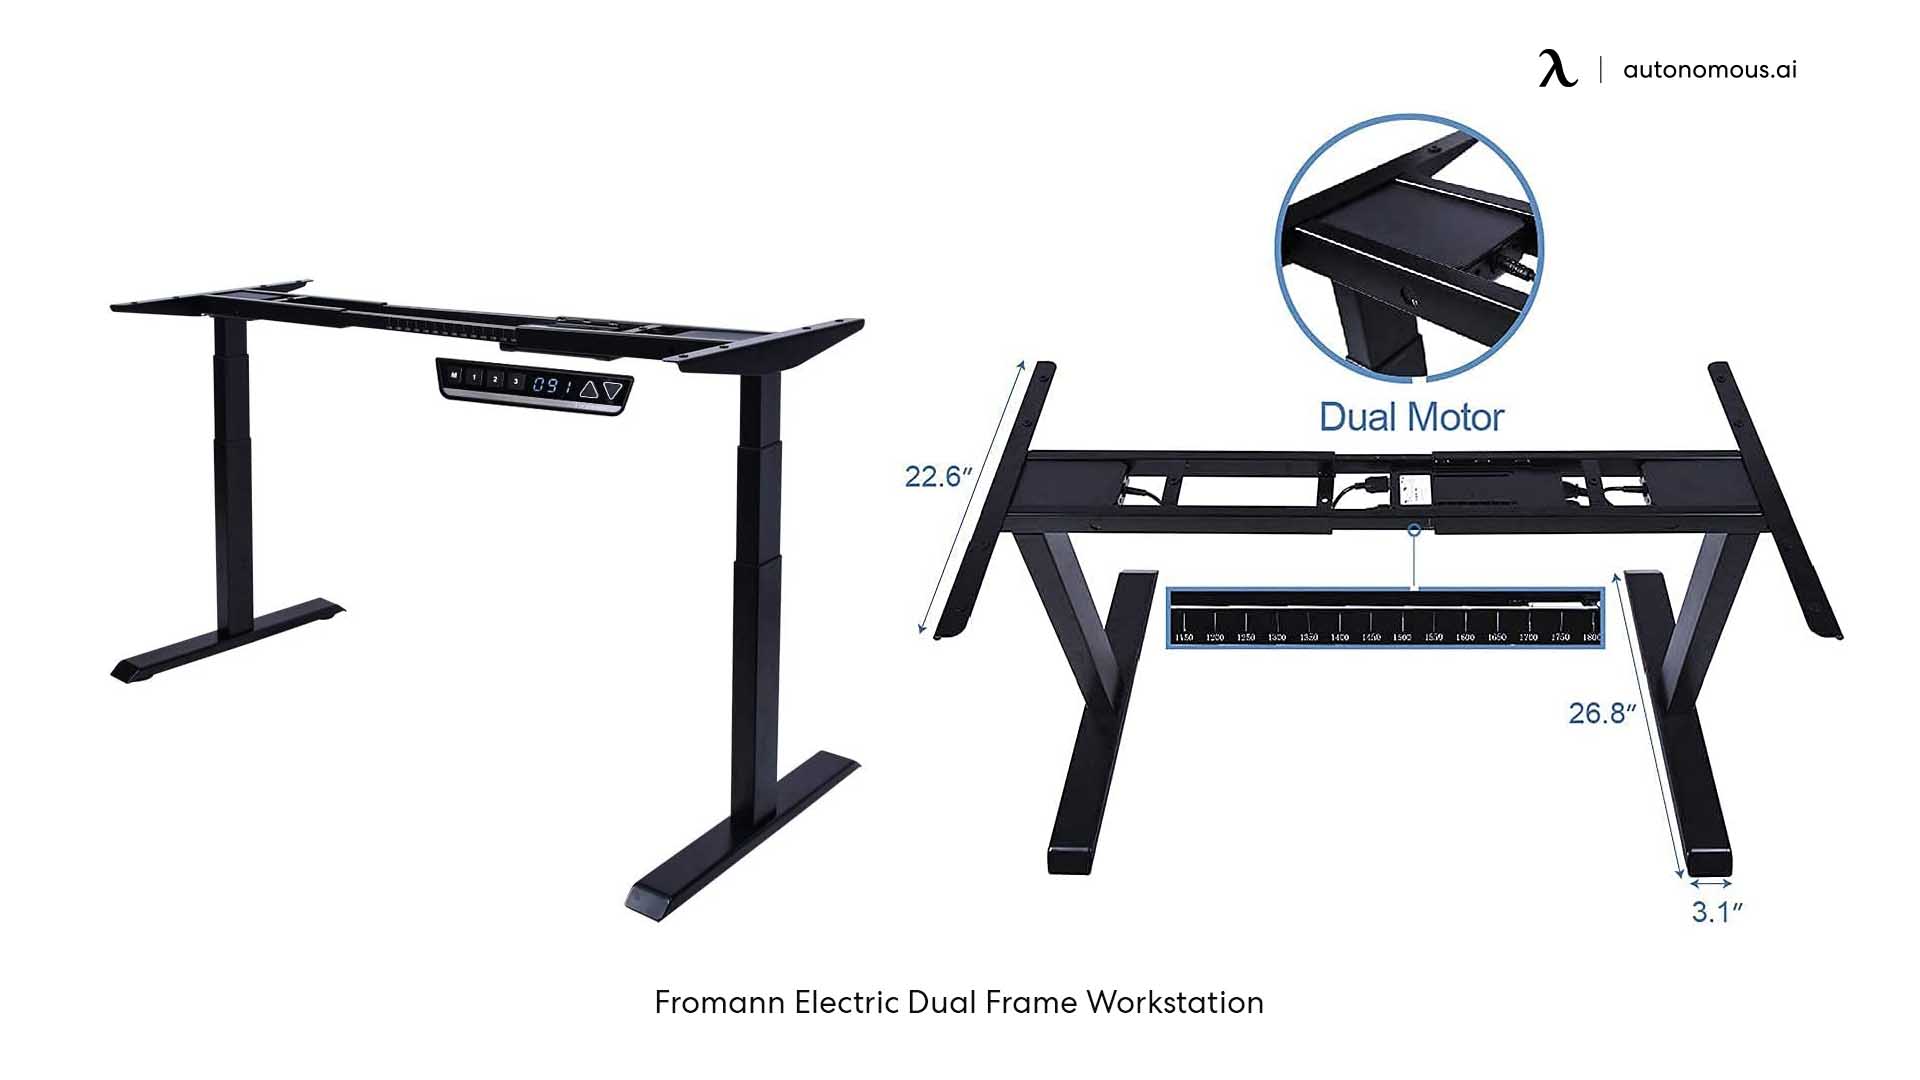 Fromann Electric Dual Frame Workstation